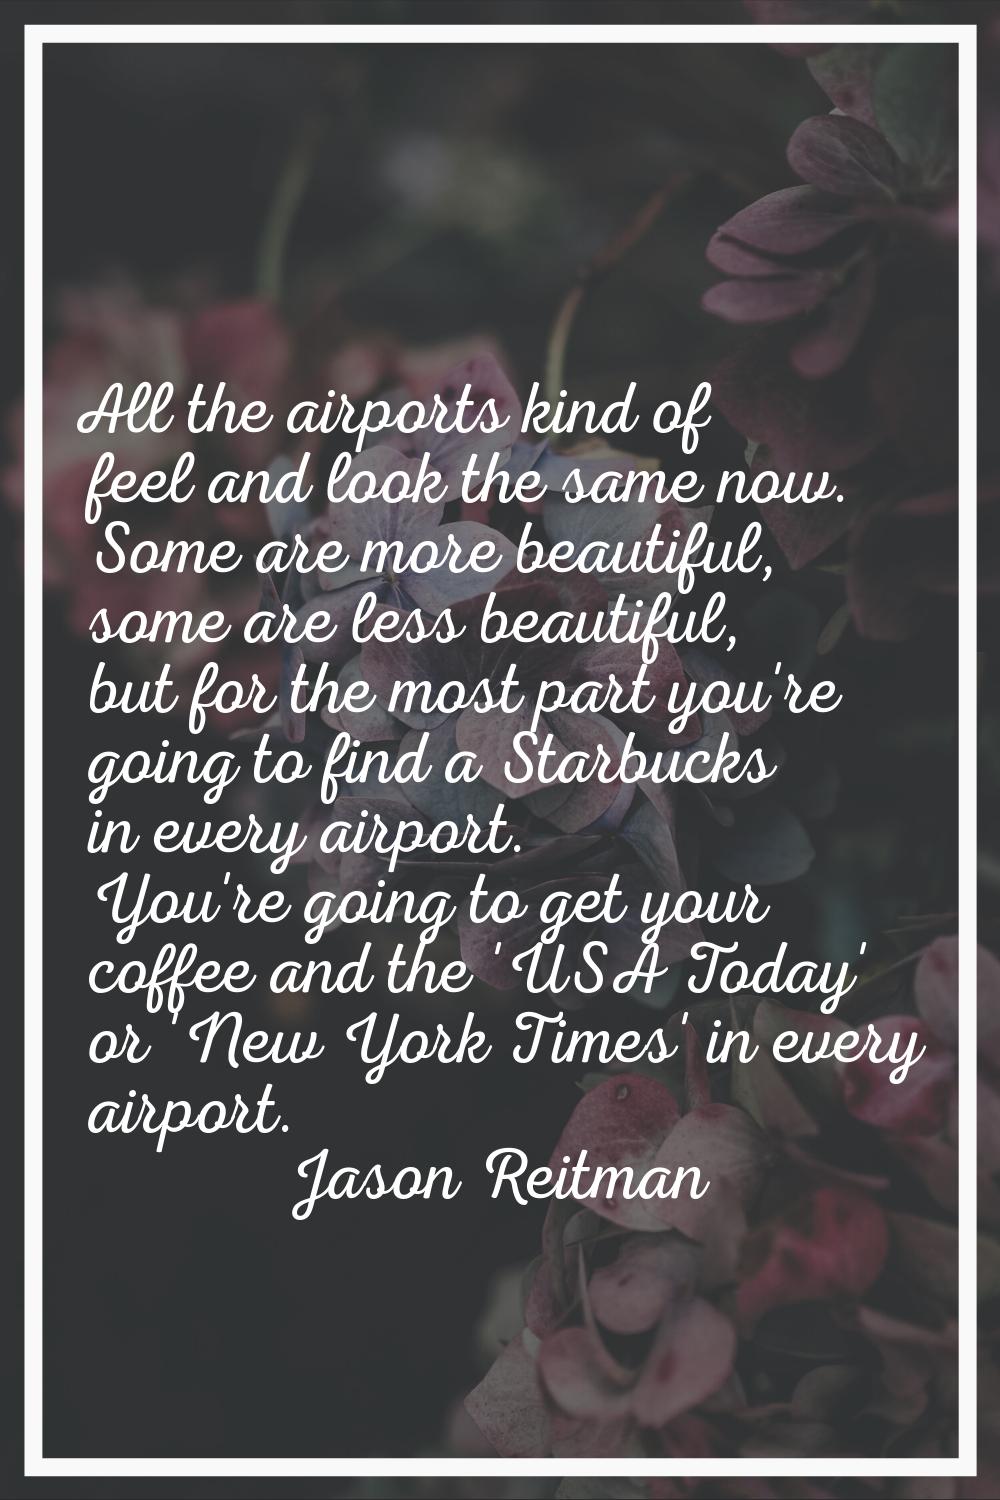 All the airports kind of feel and look the same now. Some are more beautiful, some are less beautif